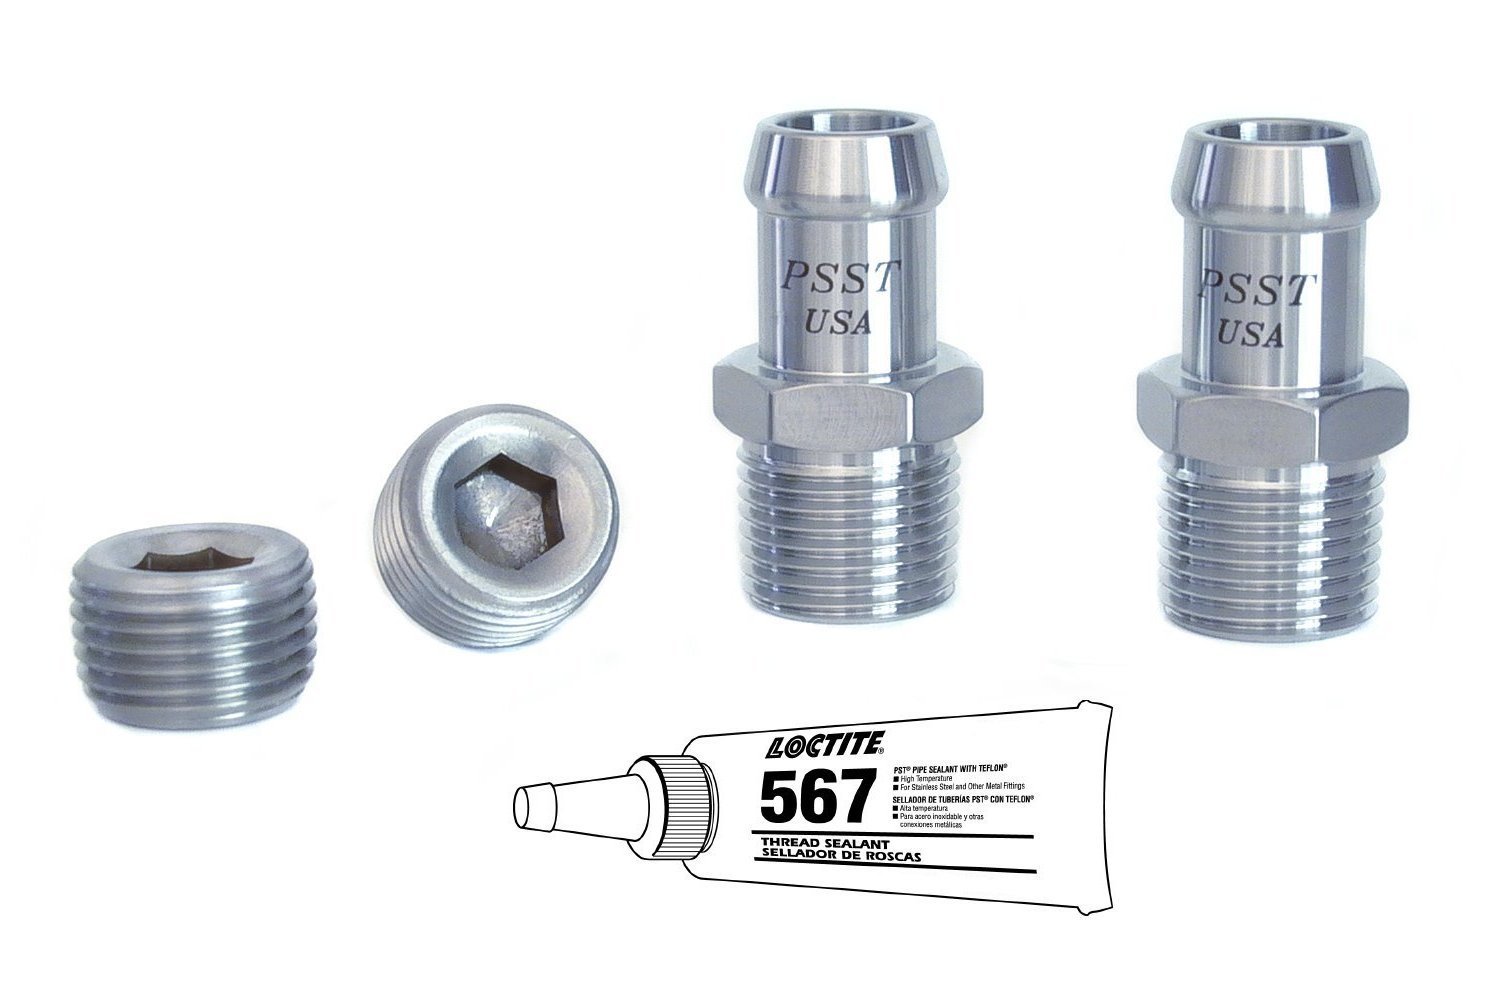 Koolkitz Fitting Kit Includes: (2) 1/2 in. NPT x 5/8 in. Hose Barb Fittings, (2) 1/2 in. NPT Plug Fittings [Polished Finish]